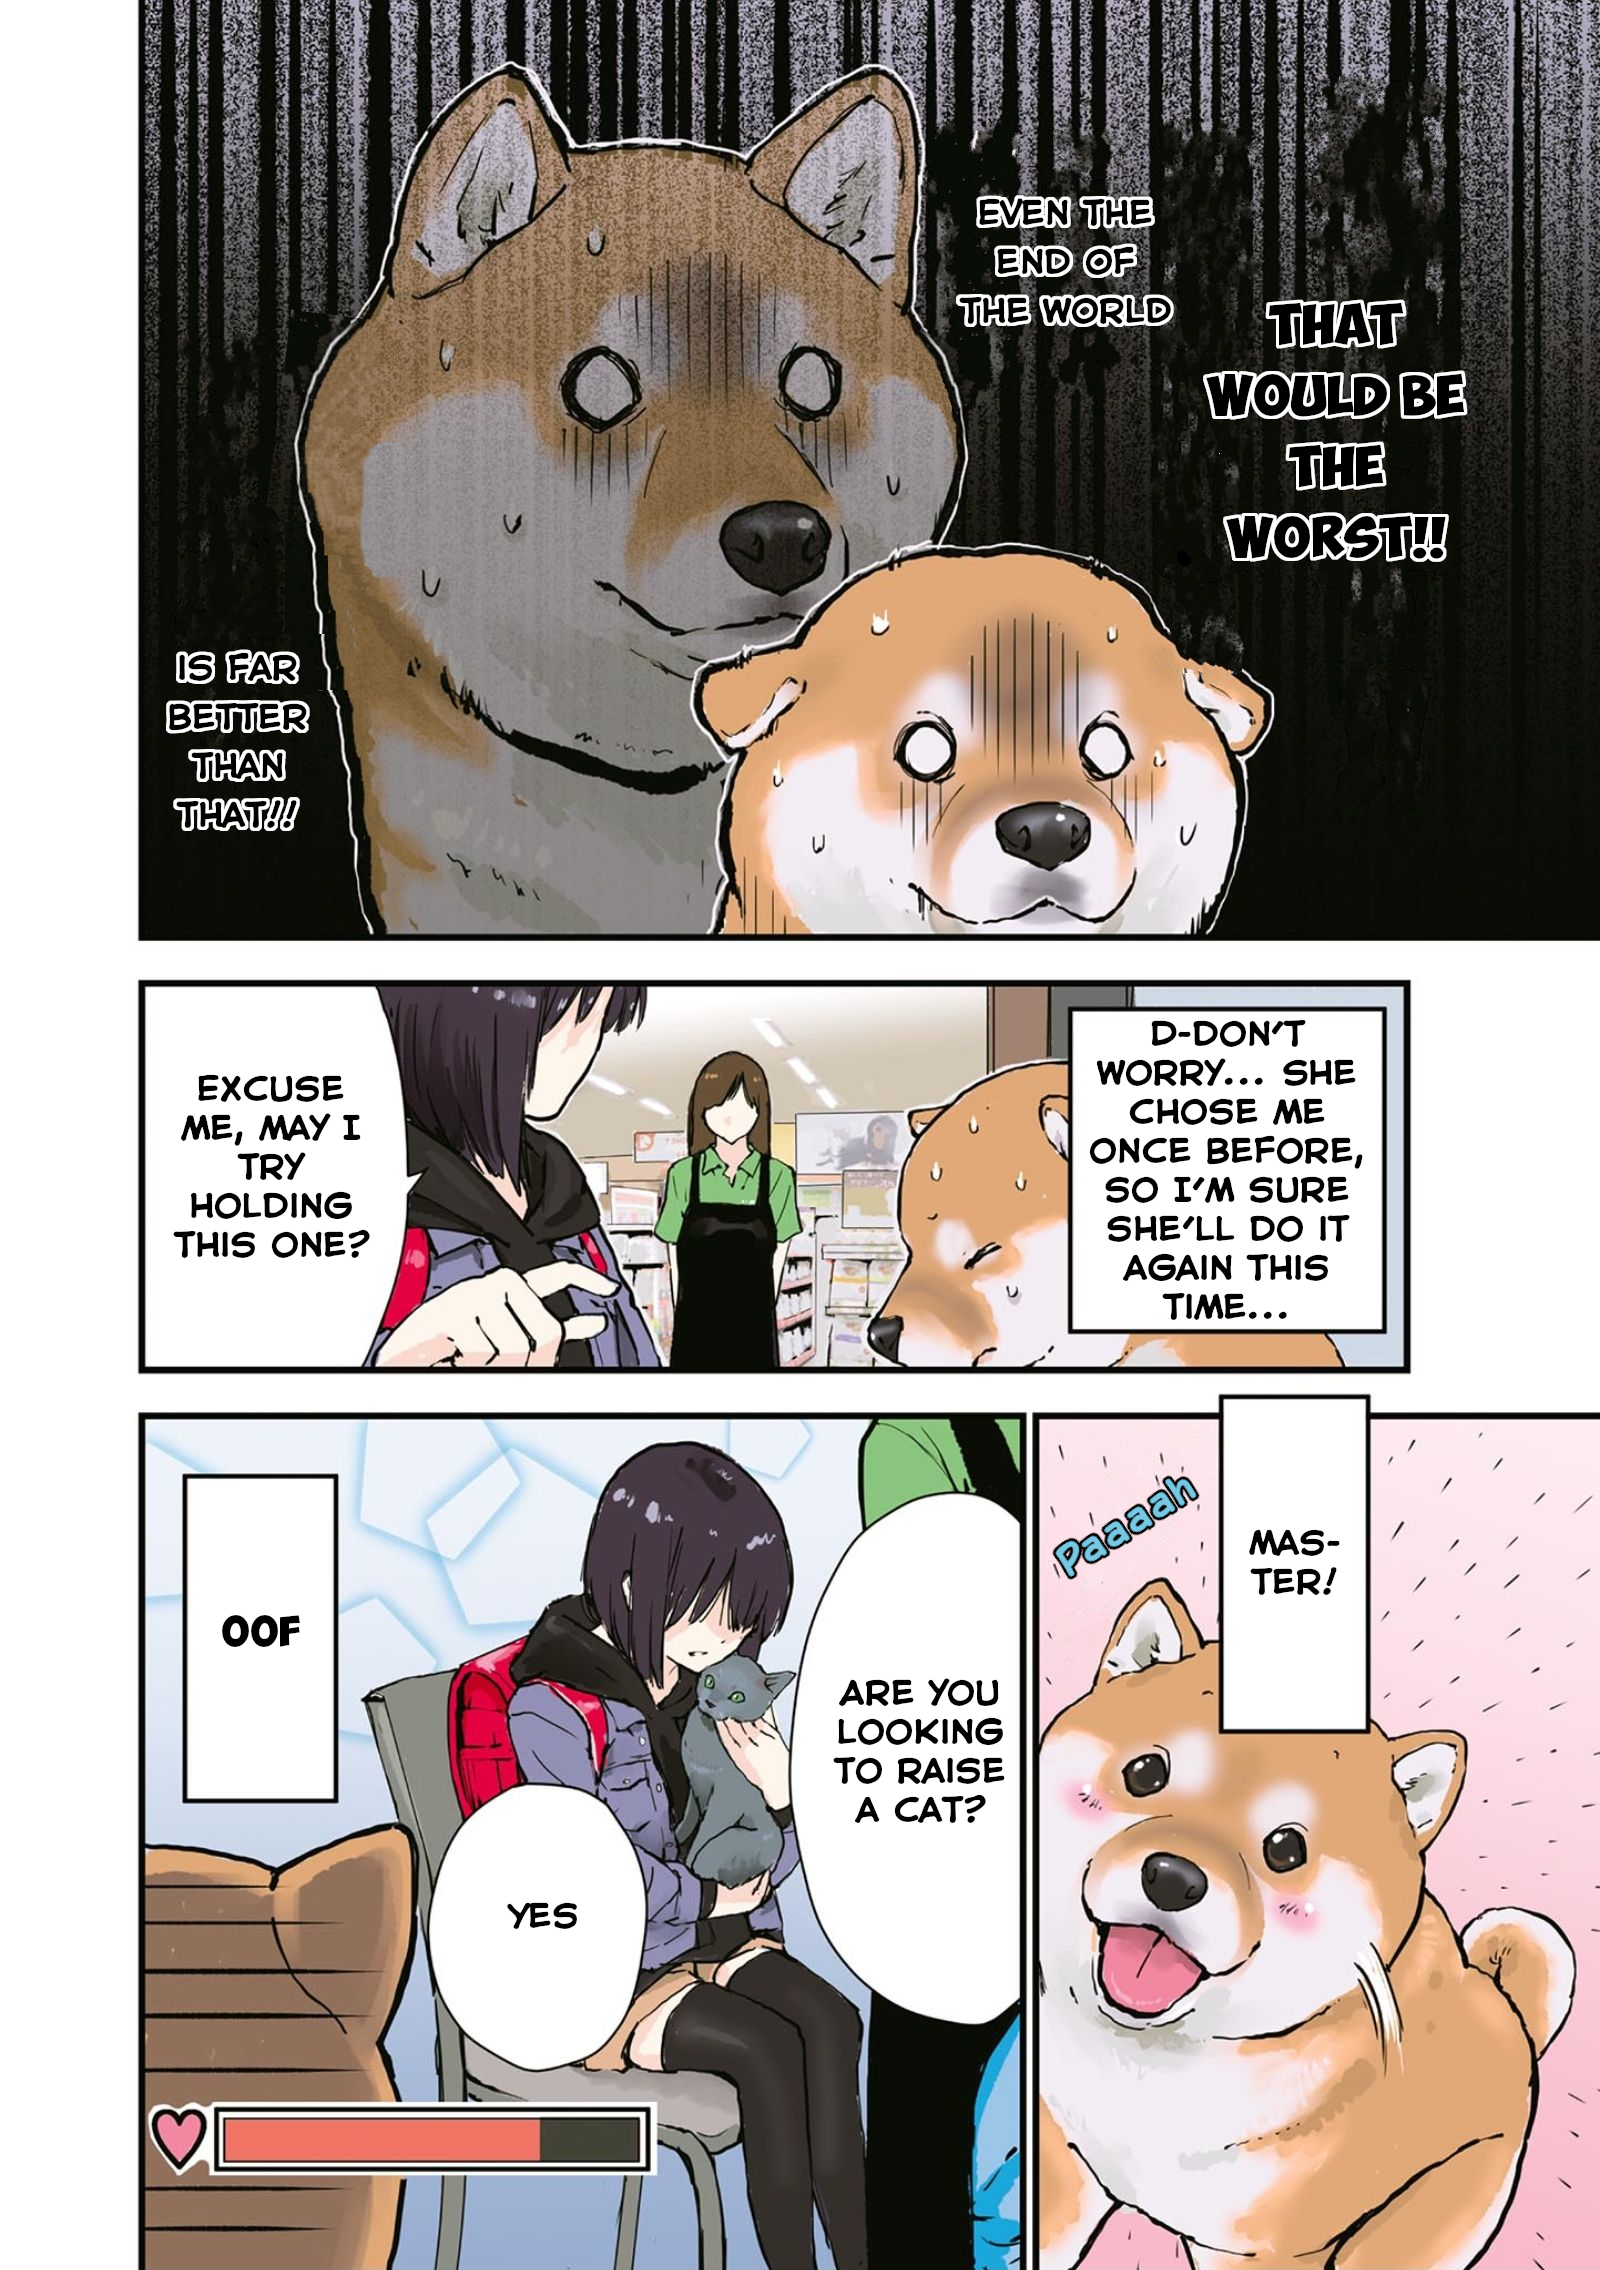 Roaming The Apocalypse With My Shiba Inu - chapter 26.5 - #6